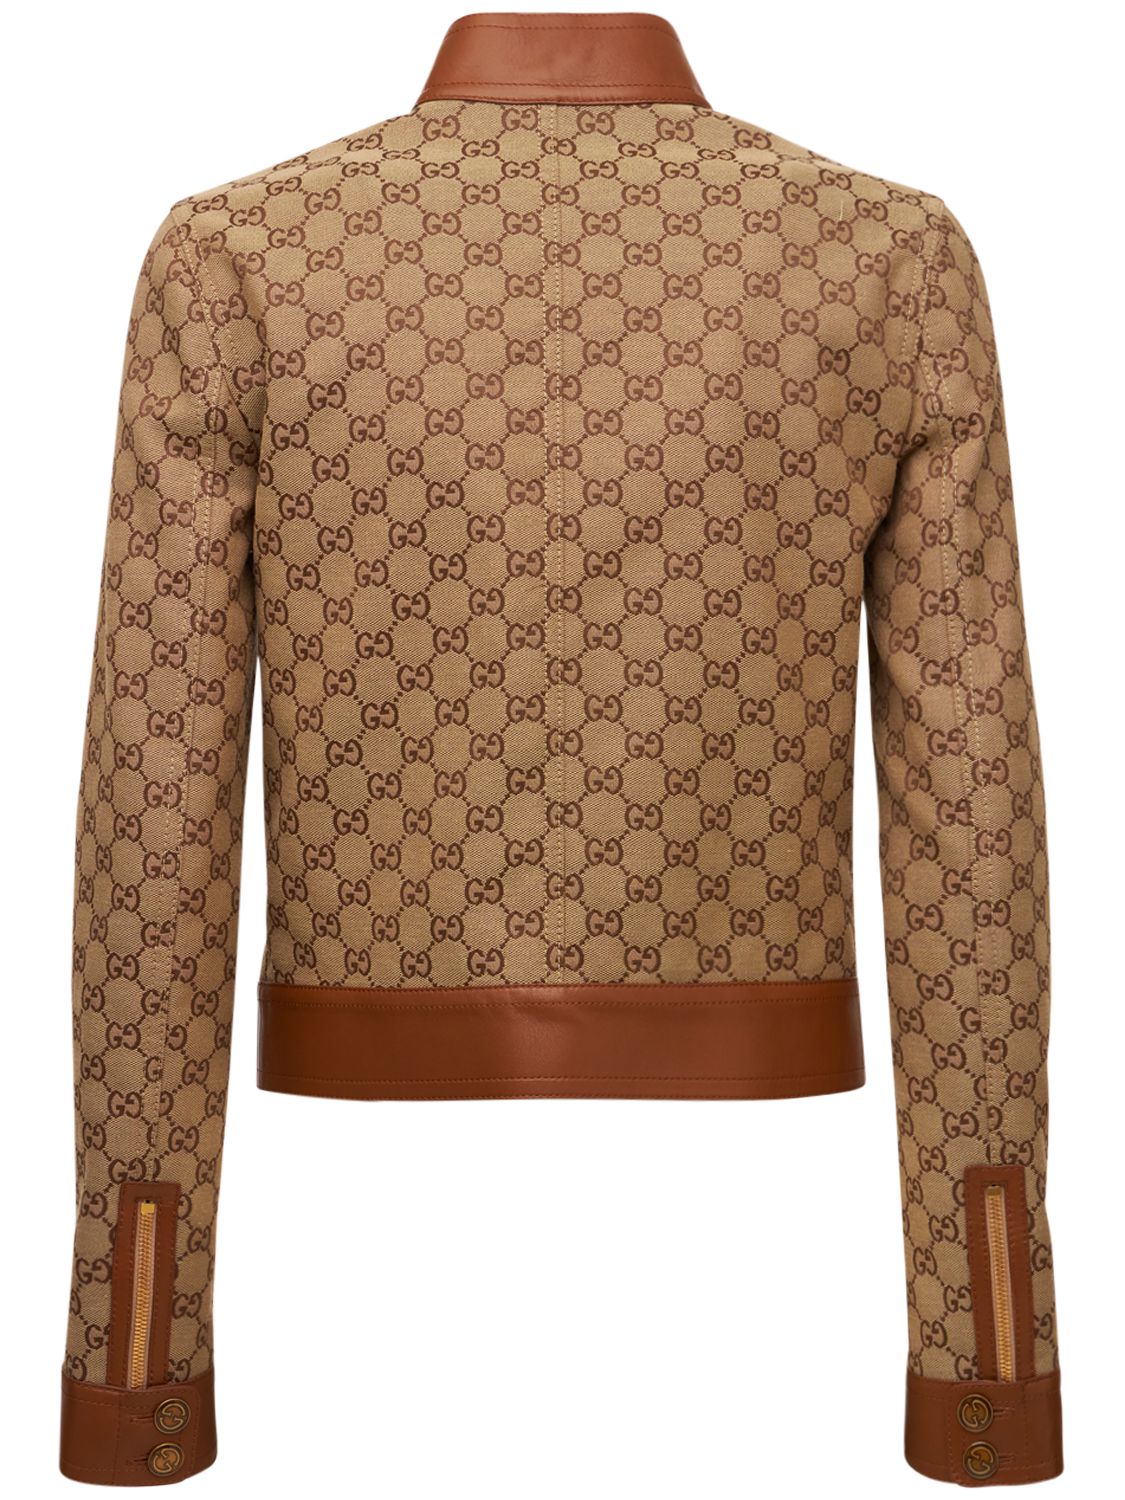 GG Supreme Canvas Bomber Jacket in Brown - Gucci